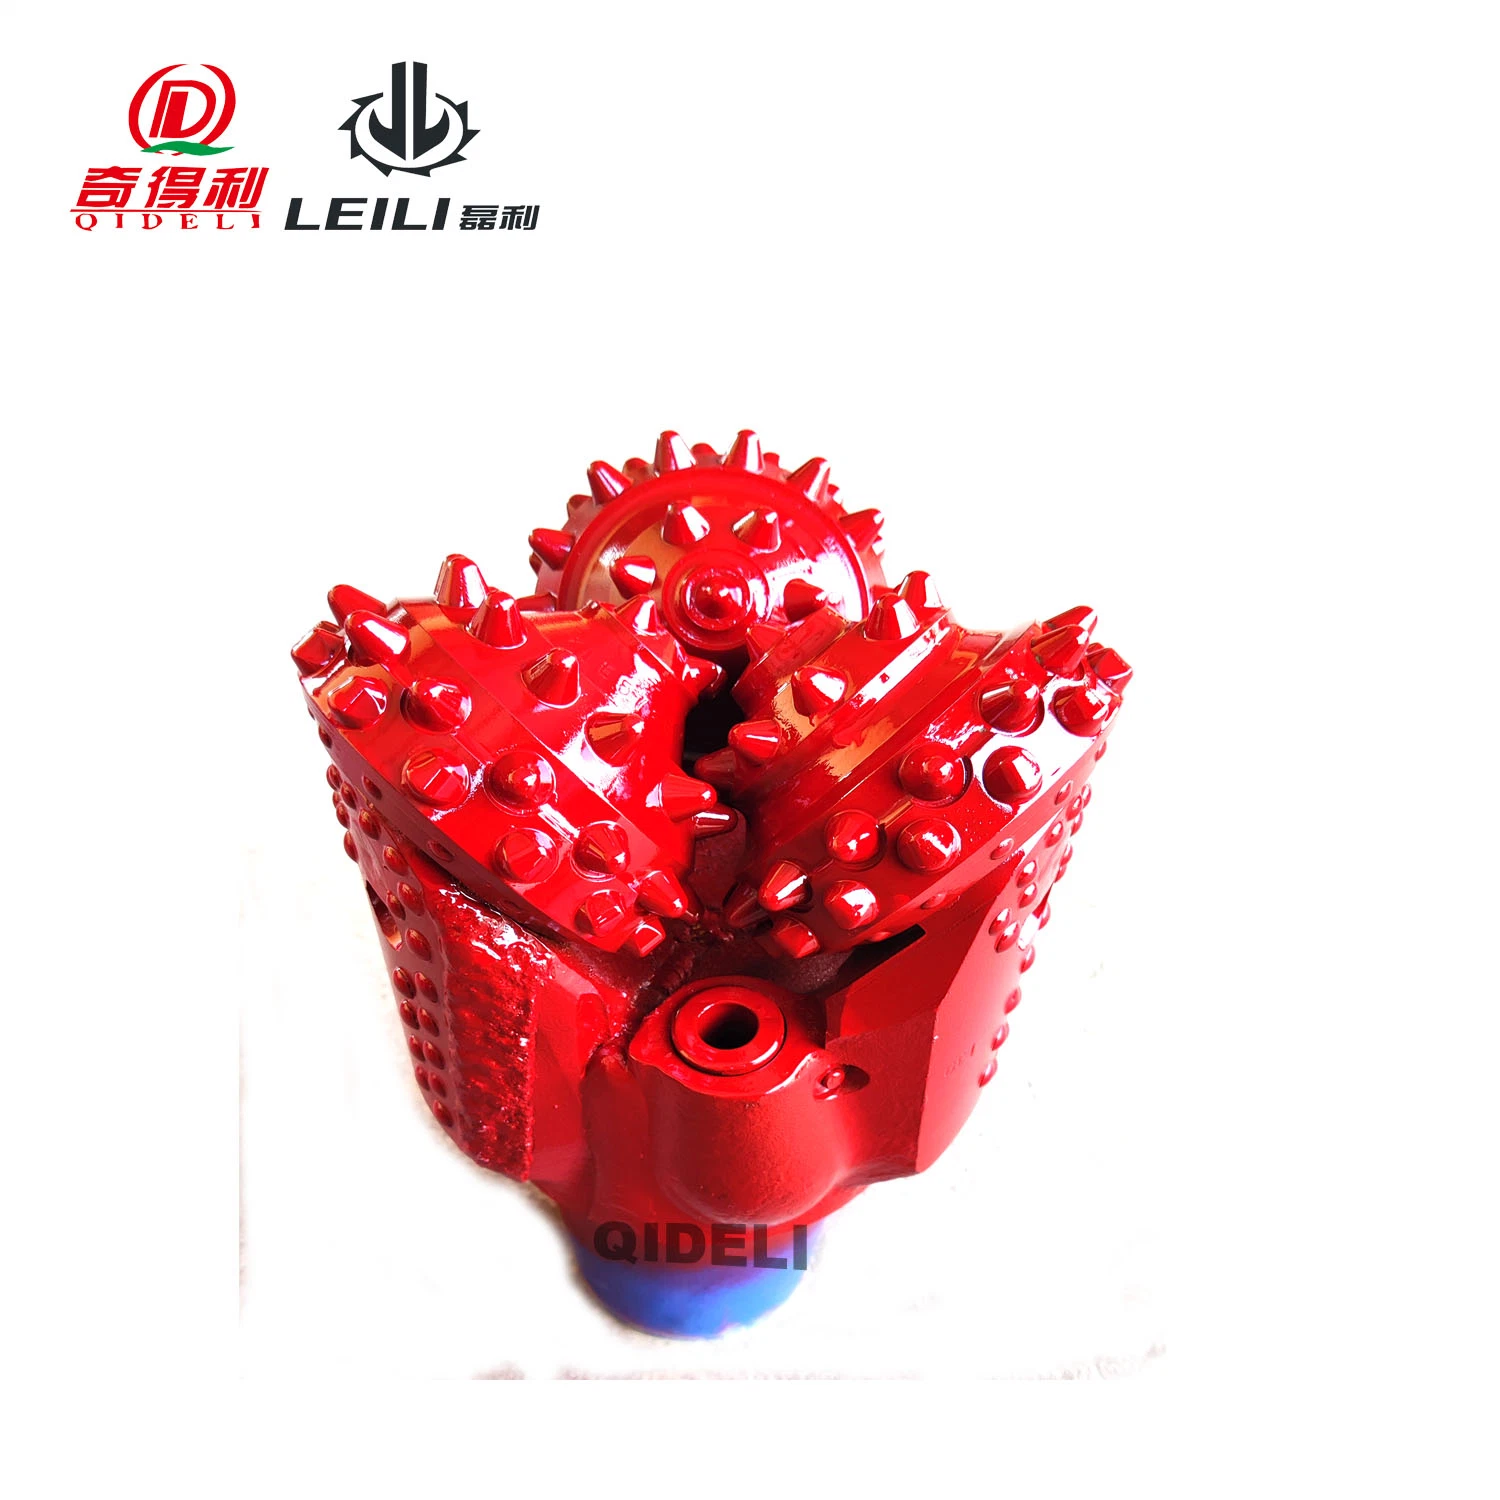 Tungsten Carbide Inserts Bit 200mm API Tricone Bit/ 7 7/8" Roller Cone Bit for Water/Oil/Gas Well Drilling Tools